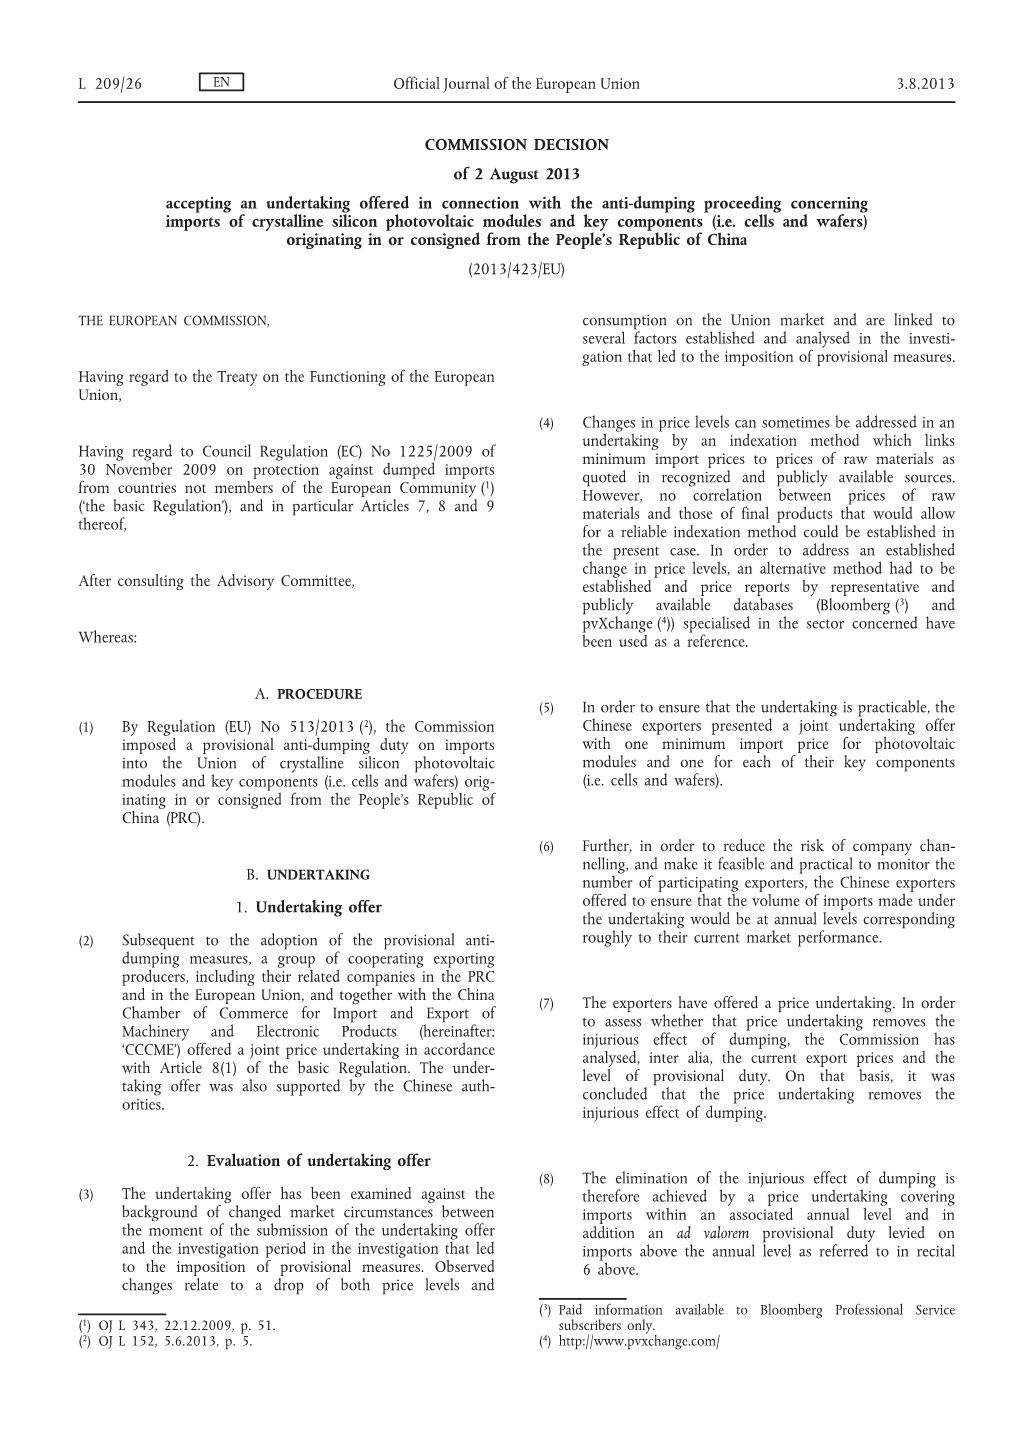 Commission Decision of 2 August 2013 Accepting an Undertaking